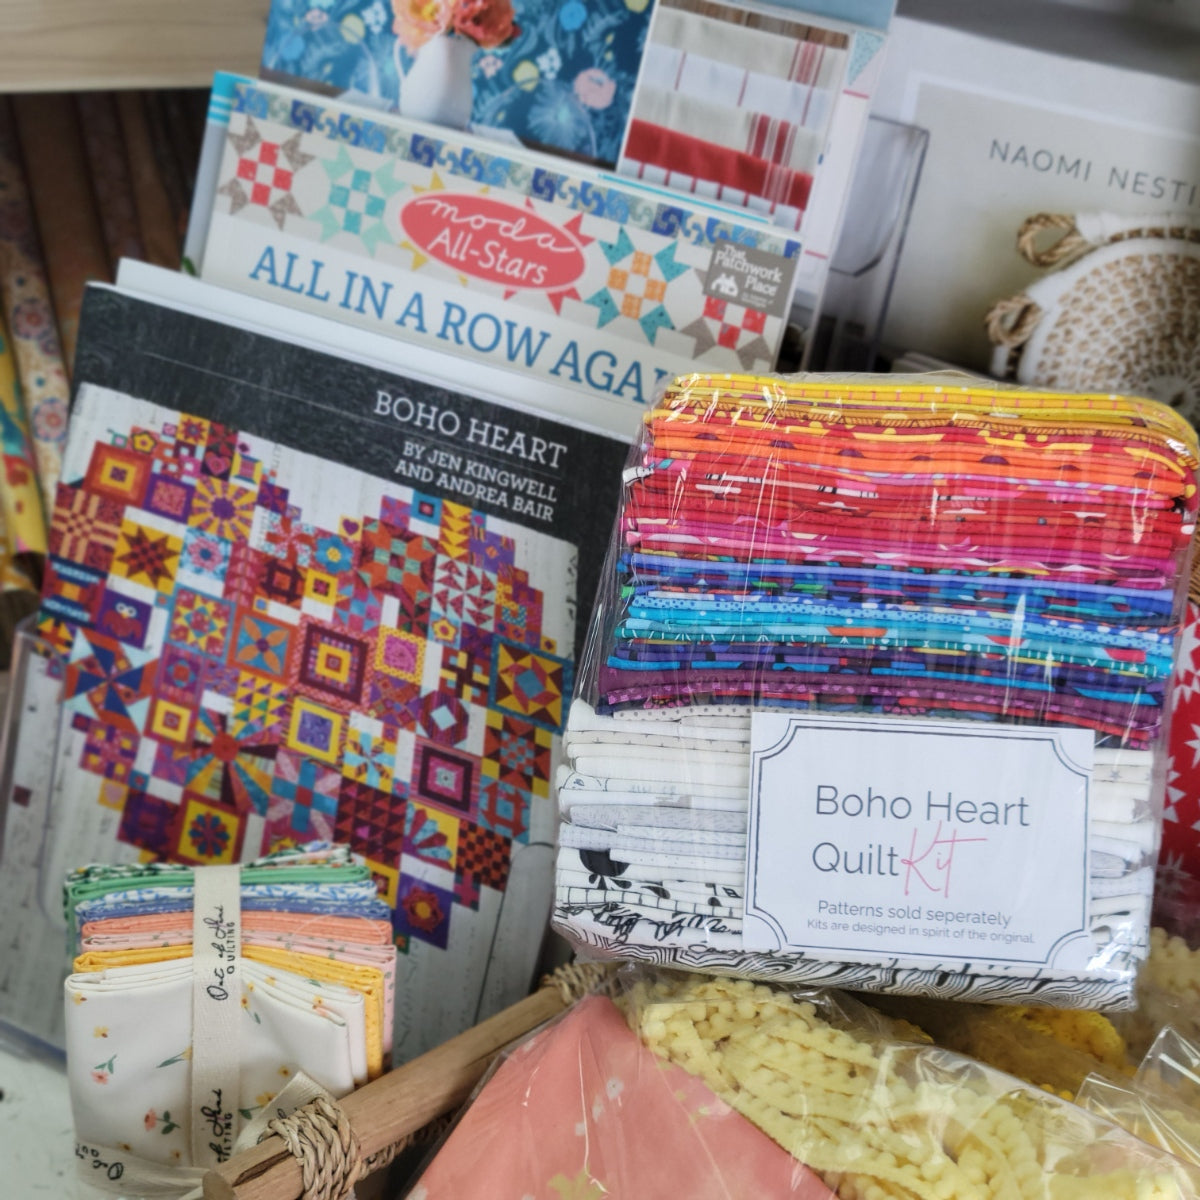 Boho Heart Quilt Kit - Out of Hand Shop Curated Quilt Kits